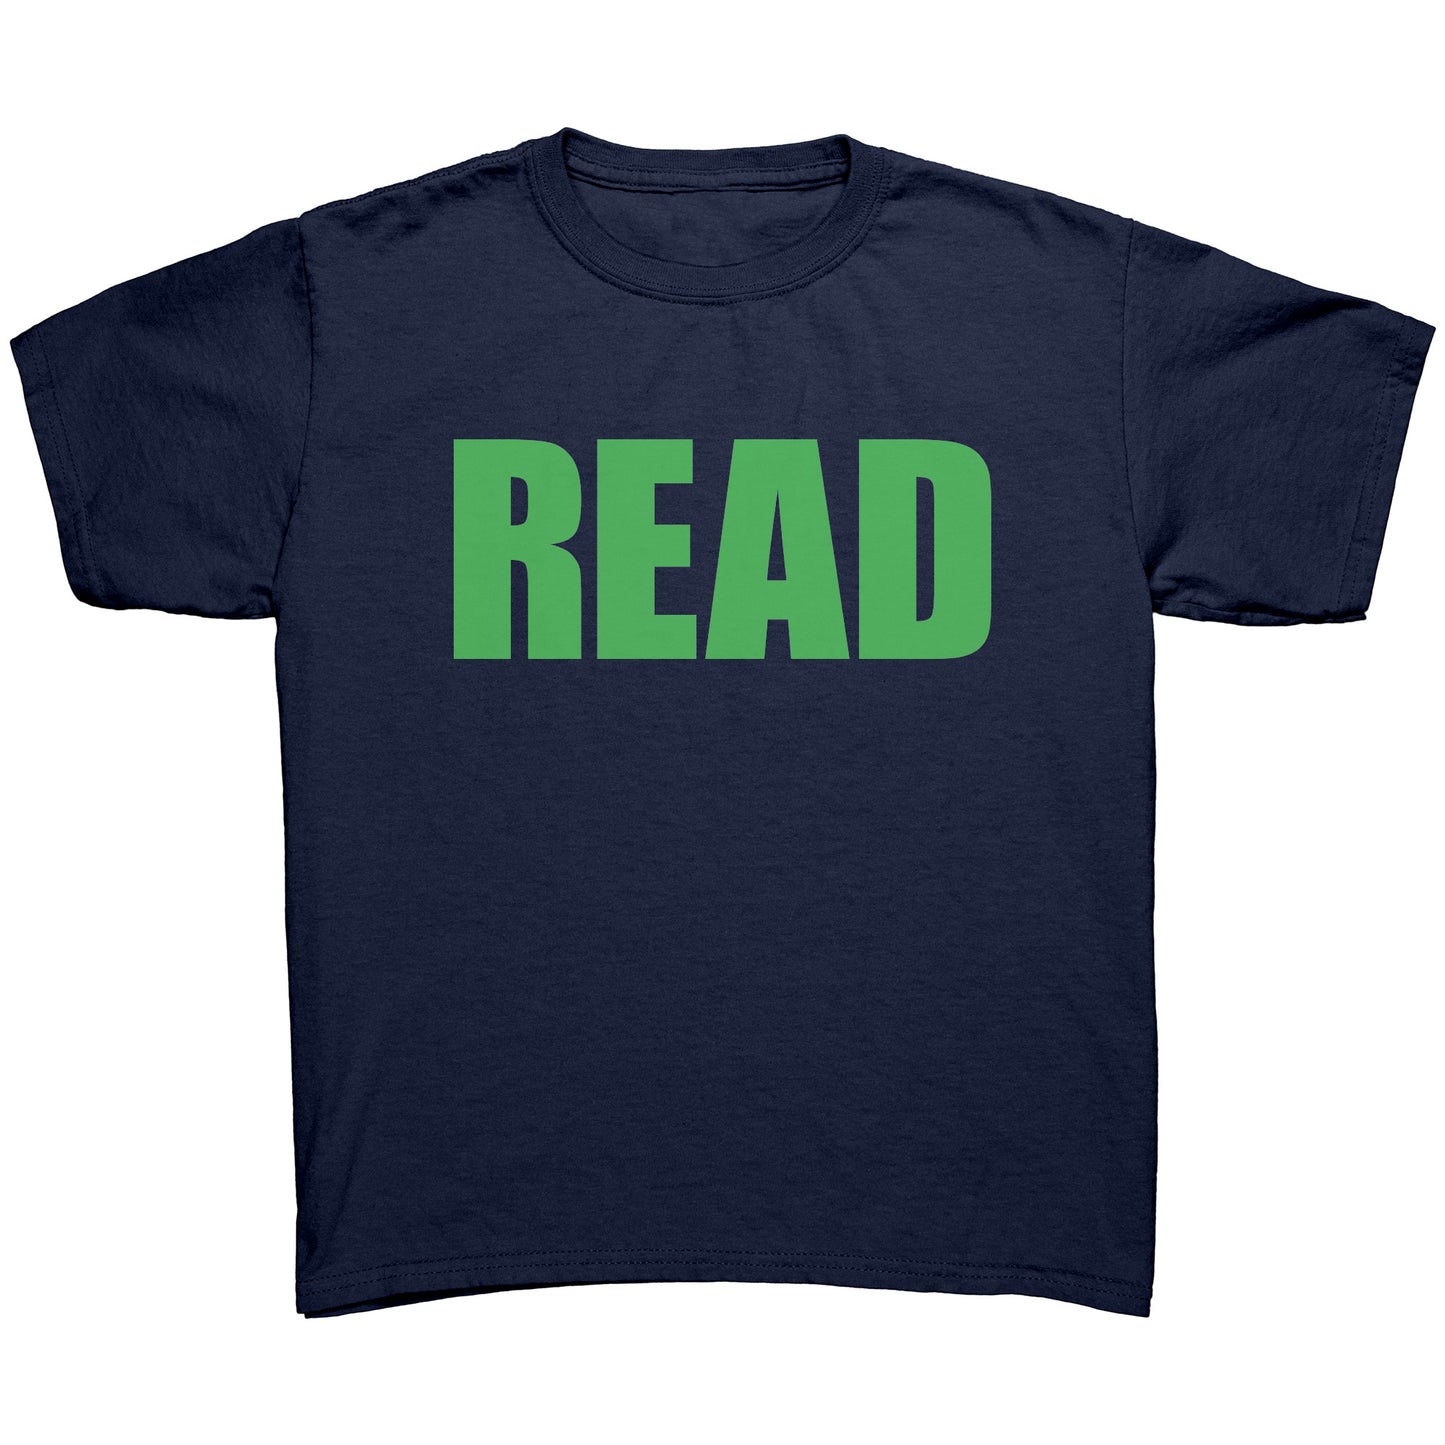 Read T-Shirt/ Green [Youth Unisex]